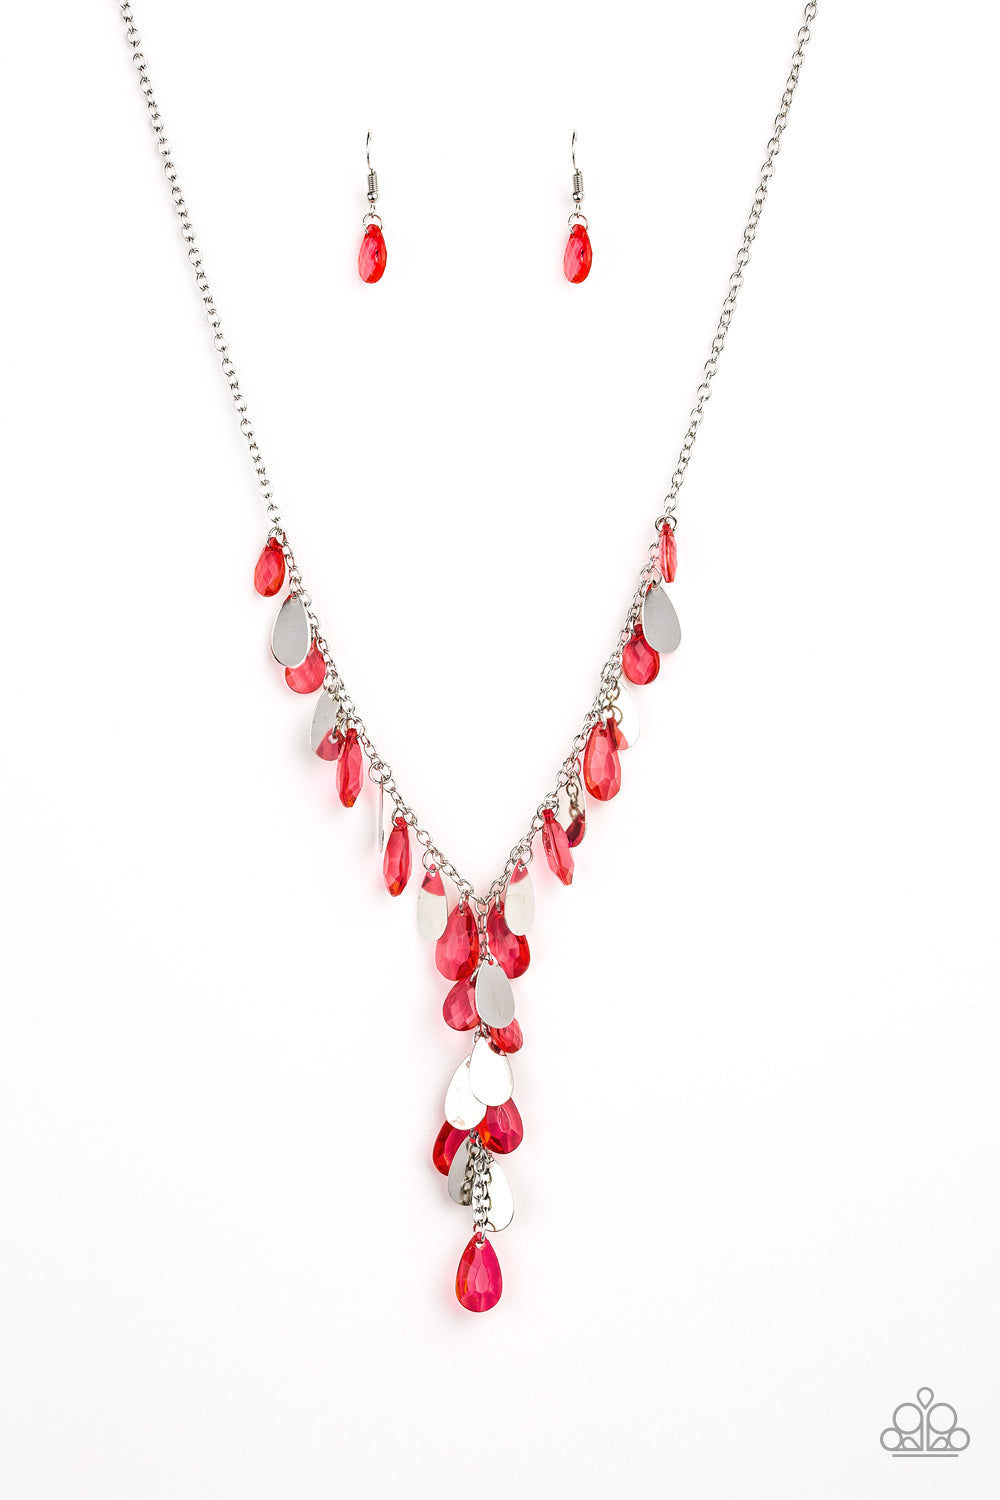 Sailboat Sunsets - Red necklace